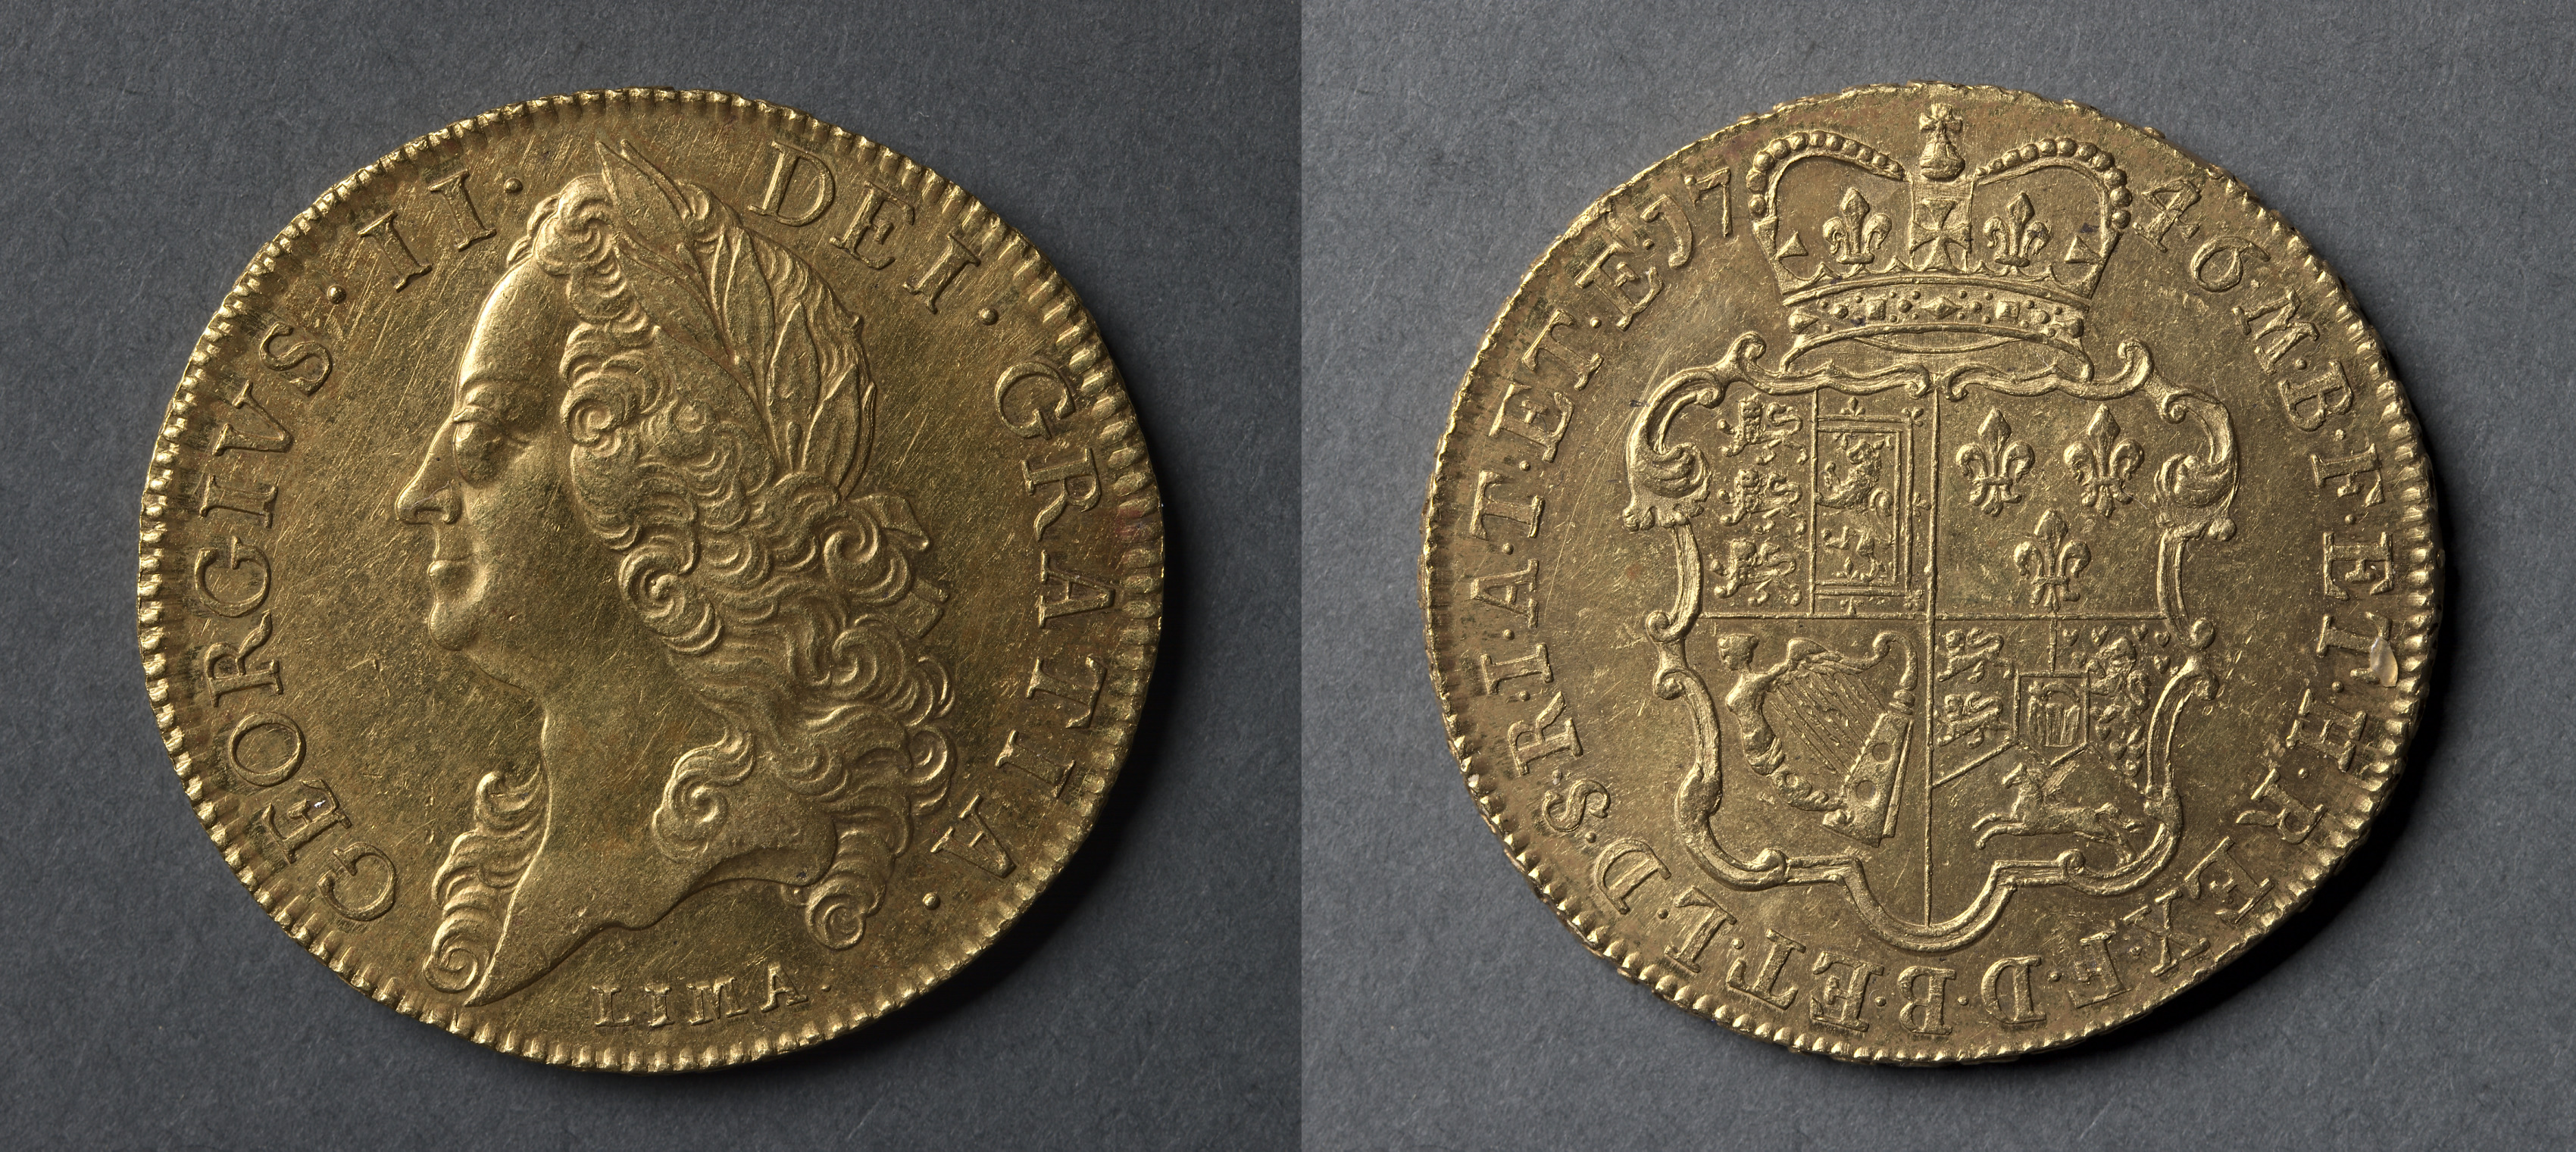 Five Guineas: George II (obverse); Shield of Arms (reverse)